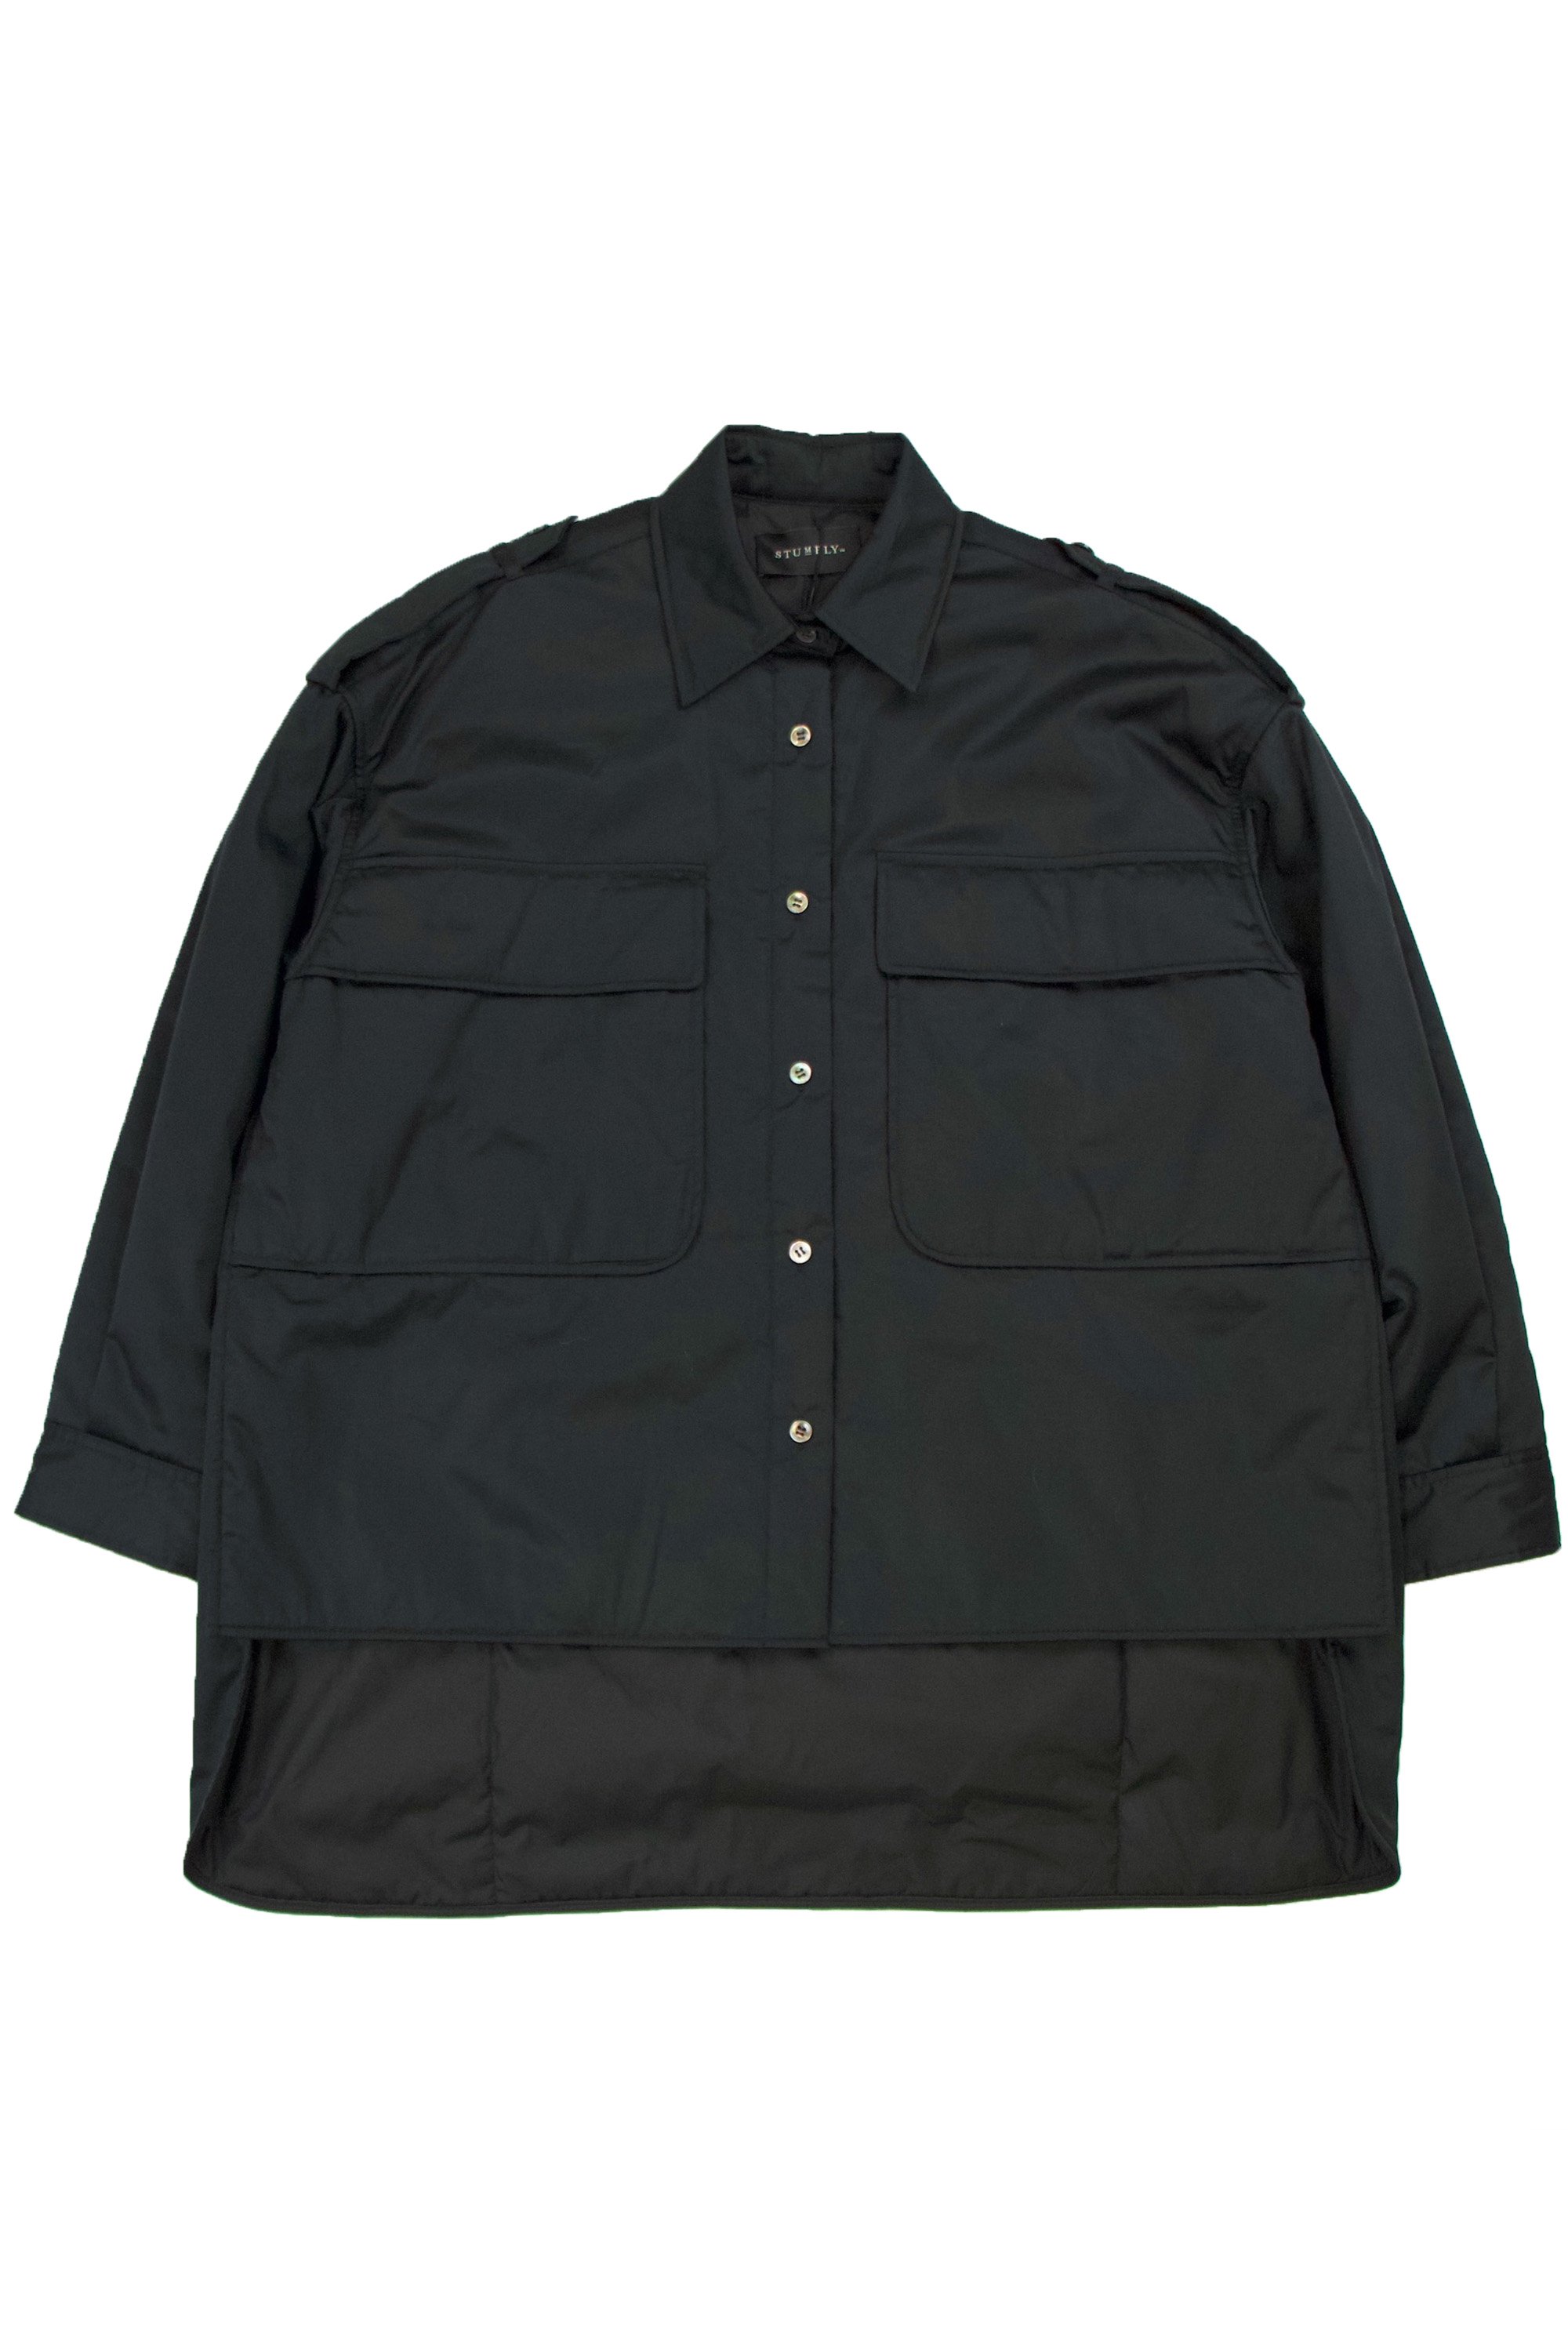 <img class='new_mark_img1' src='https://img.shop-pro.jp/img/new/icons22.gif' style='border:none;display:inline;margin:0px;padding:0px;width:auto;' />30%OFF STUMBLY Shirt jacket